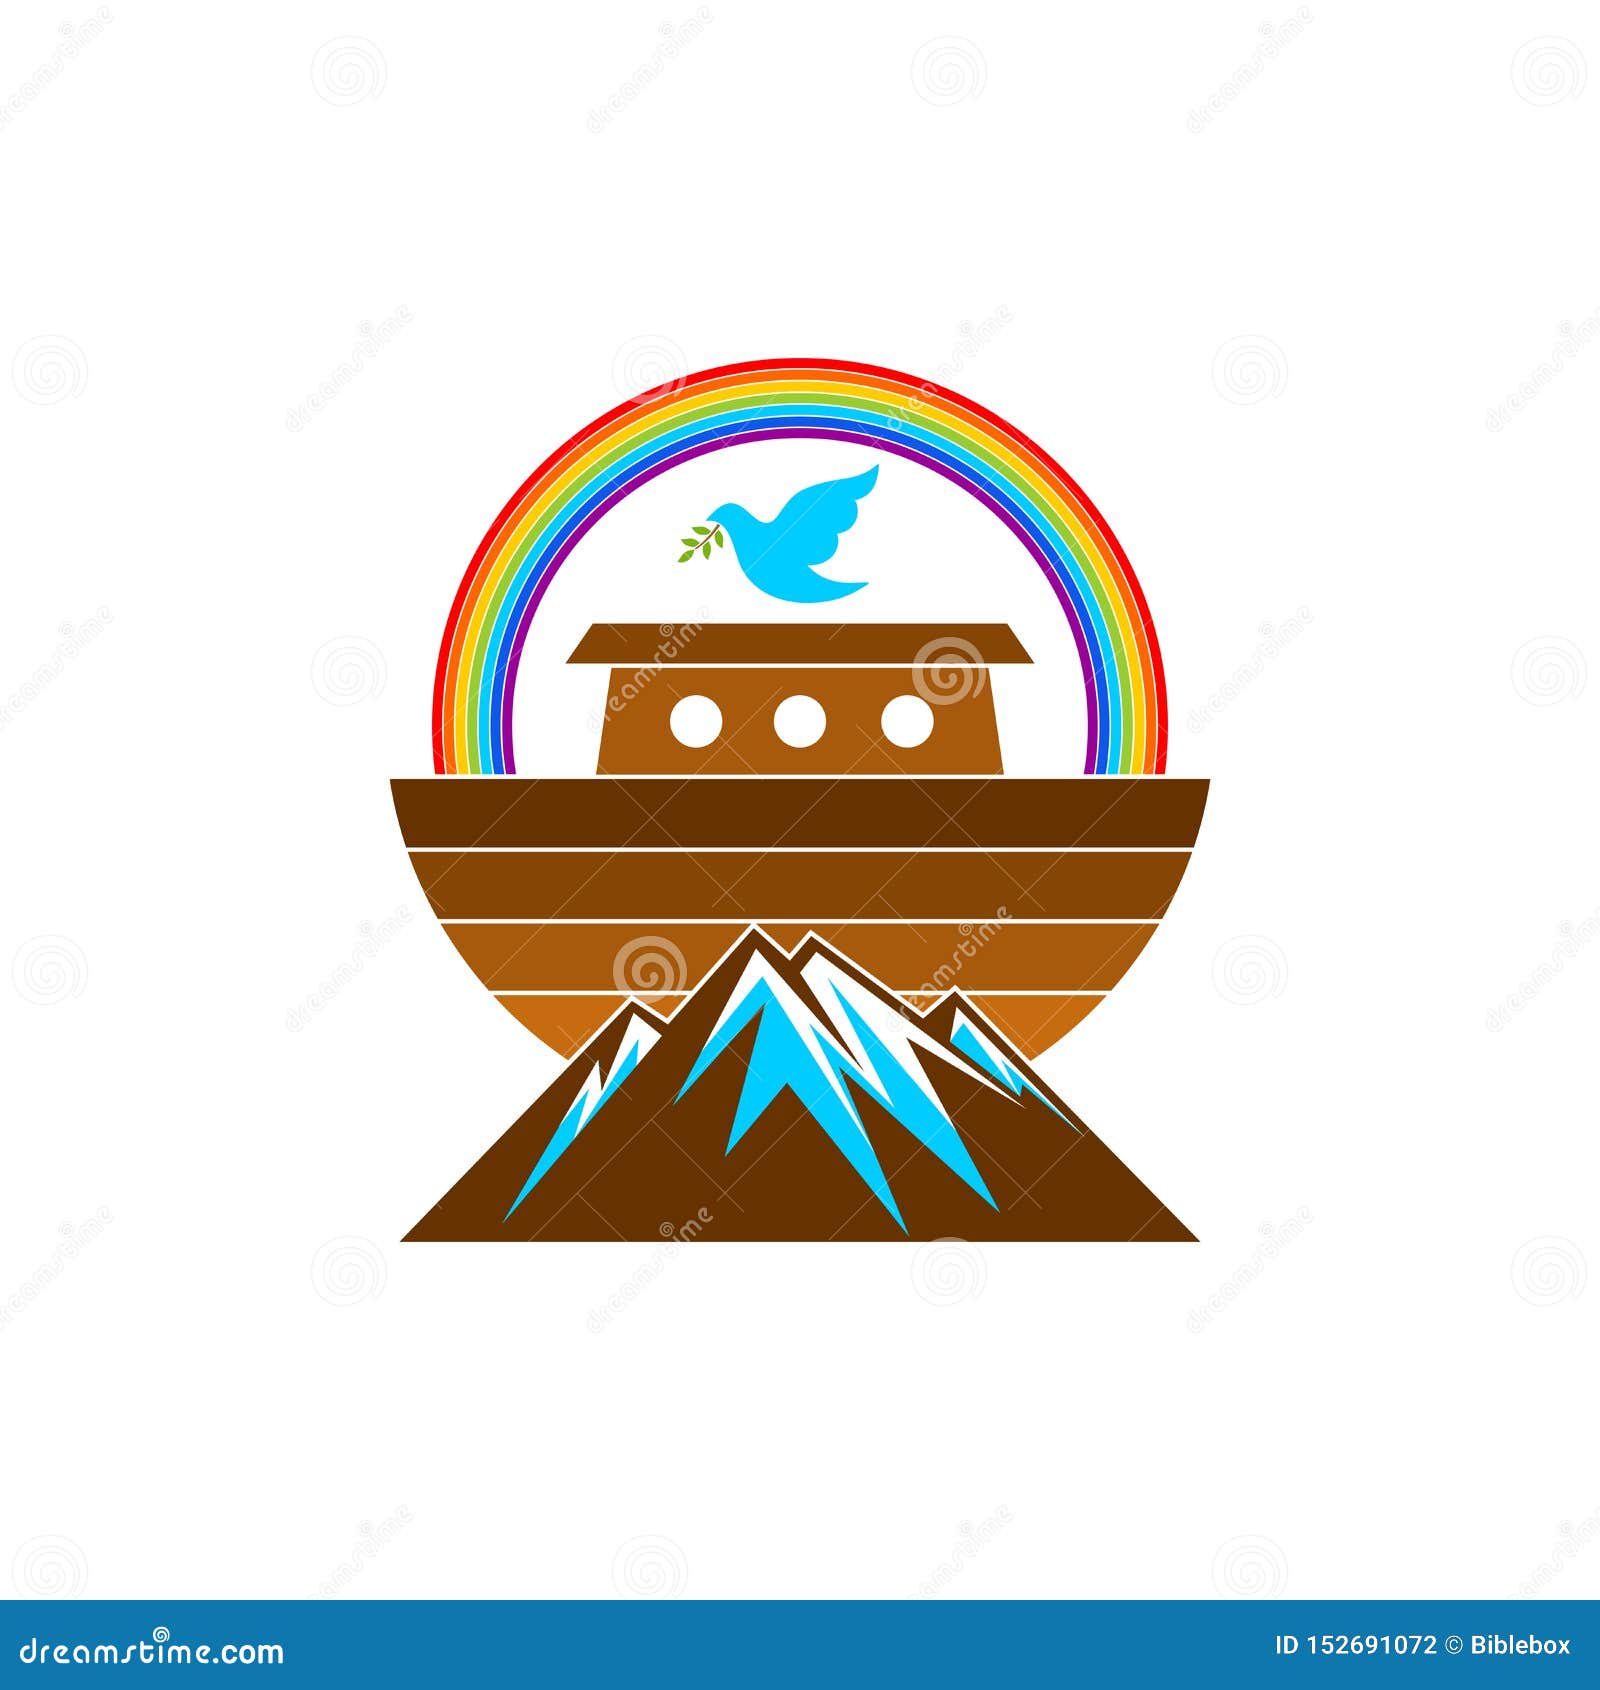 Logo Of Noah S Ark Rainbow A Symbol Of The Covenant Dove With A Branch Of Olive Ship To Rescue Animals And People Stock Vector Illustration Of Christ Evangelism